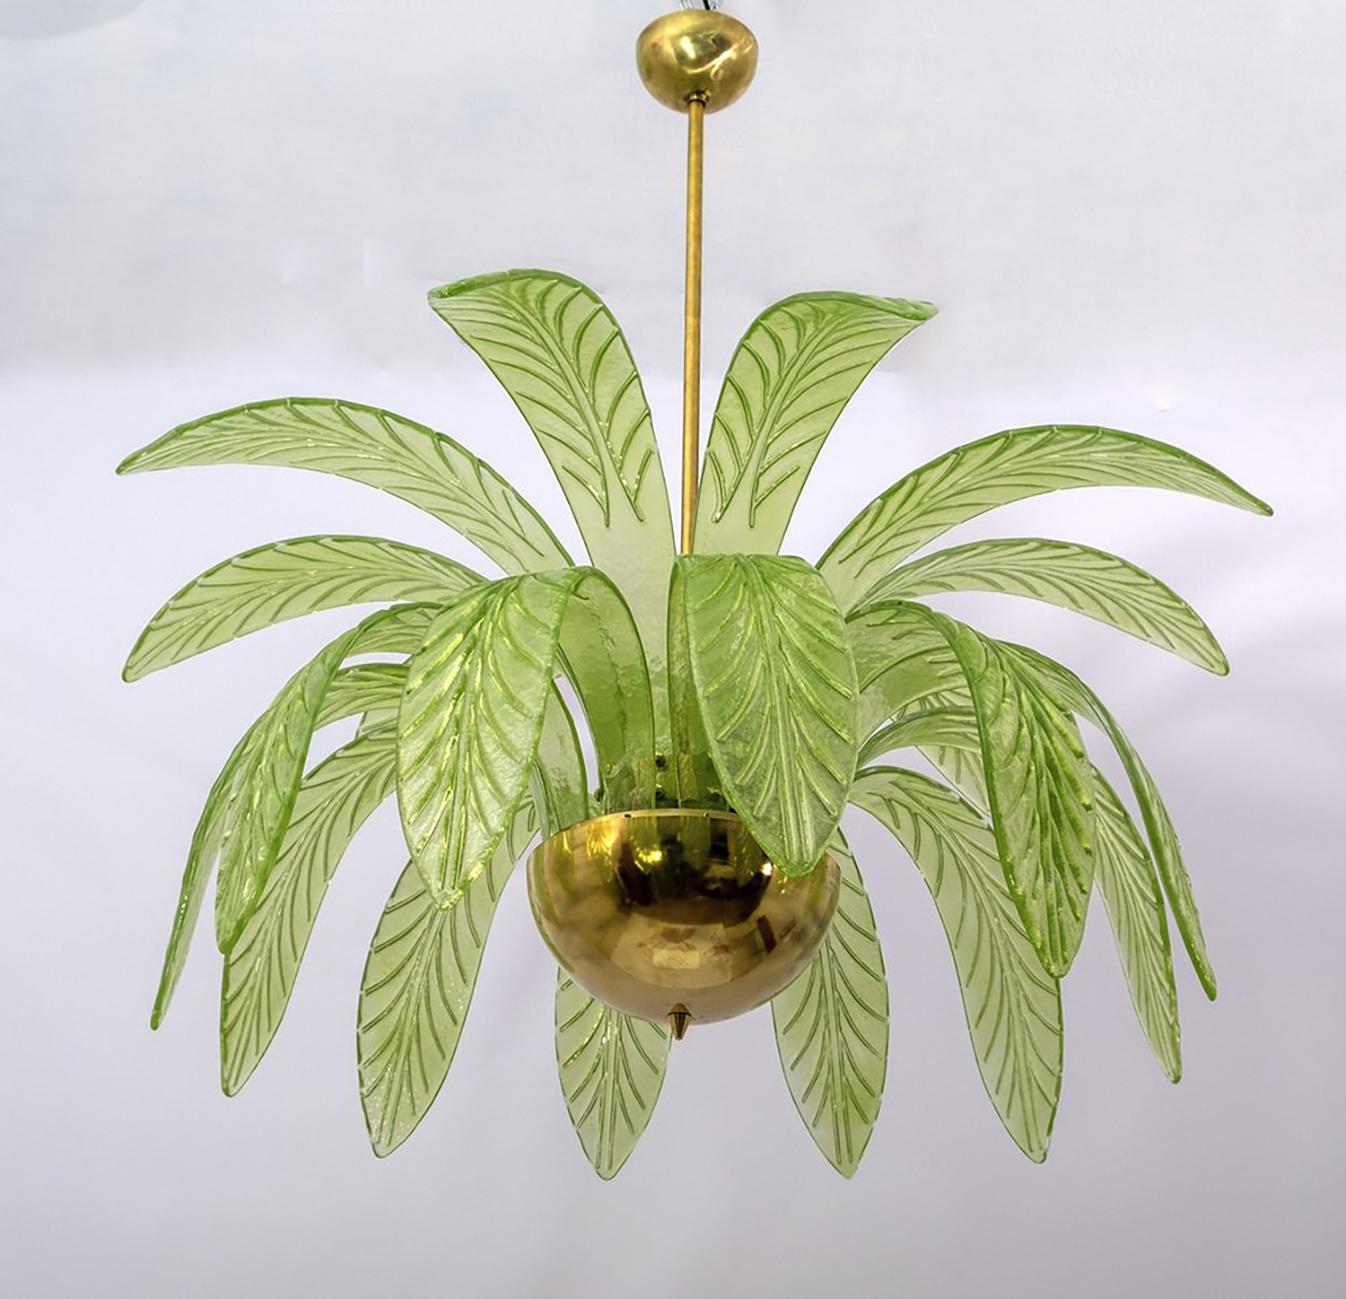 Mouth blown murano glass chandelier, 21 green murano glass leaves, brass structure, five bulbs.
The chandelier reproduces the crown of a palm tree.
We supply reducers for USA E12 bulbs
